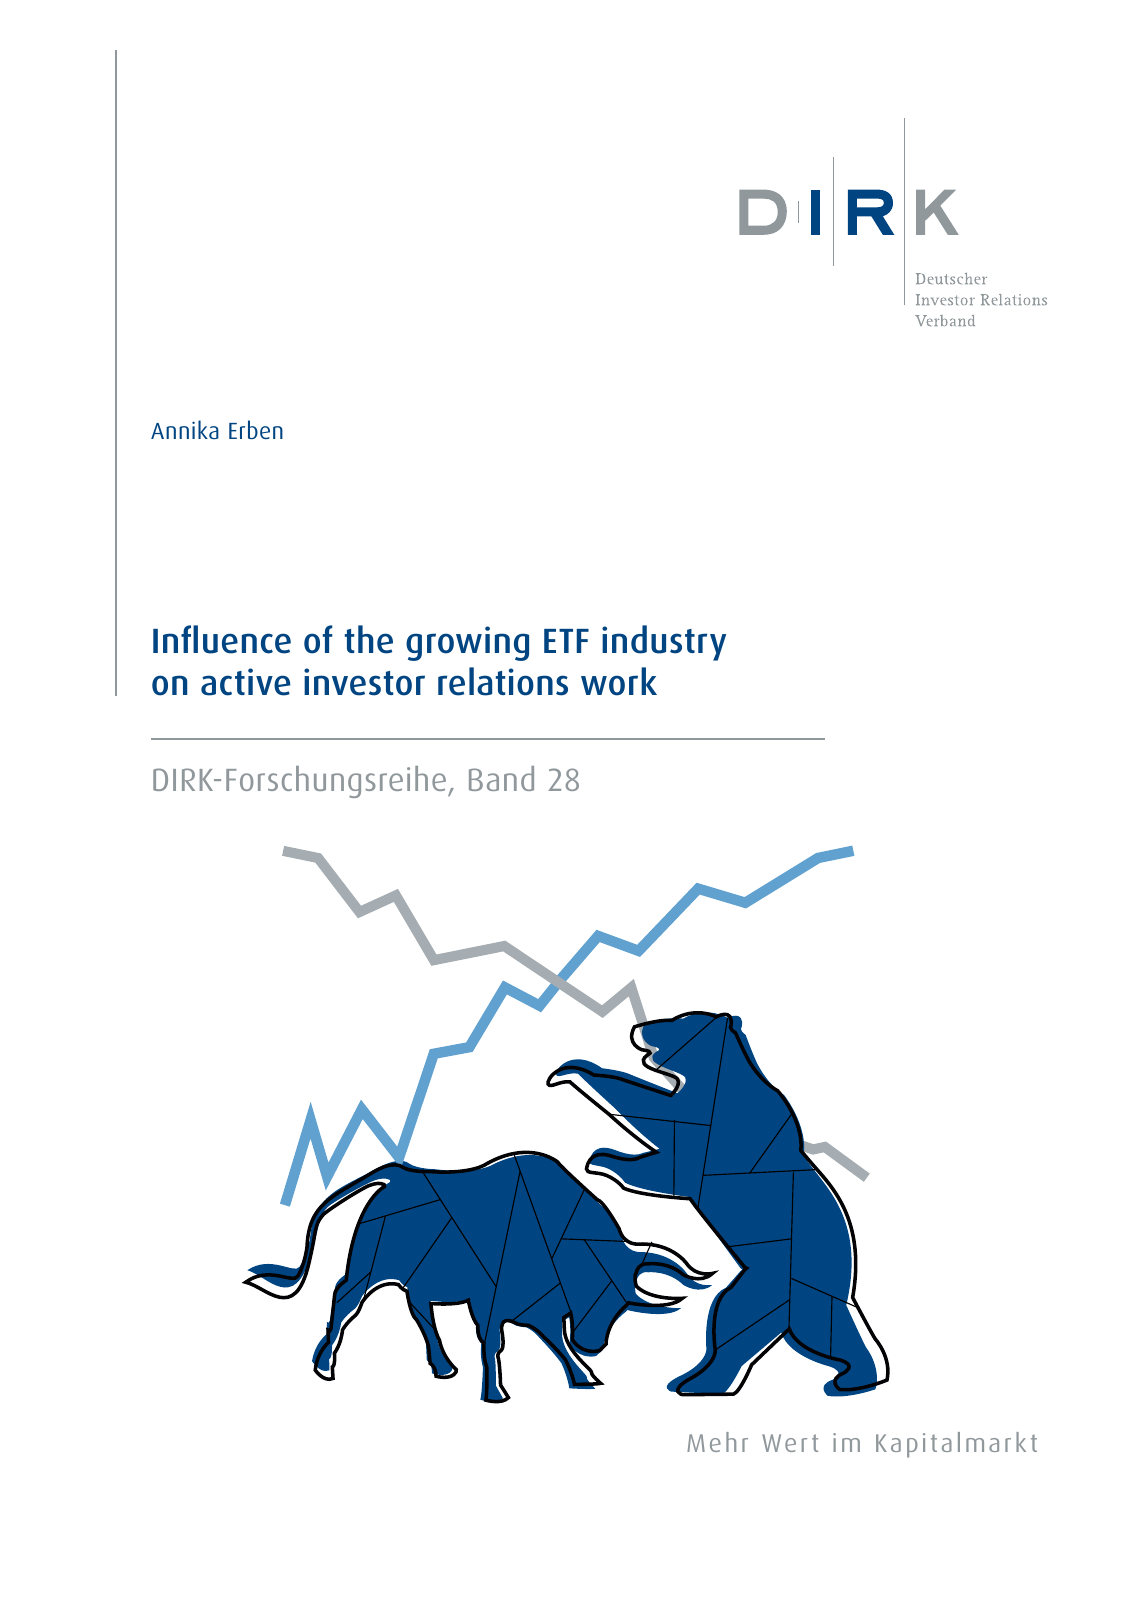 Vorschau DIRK-Forschungsreihe Band 28: Influence of the growing ETF industry on active investor relations work Seite 1